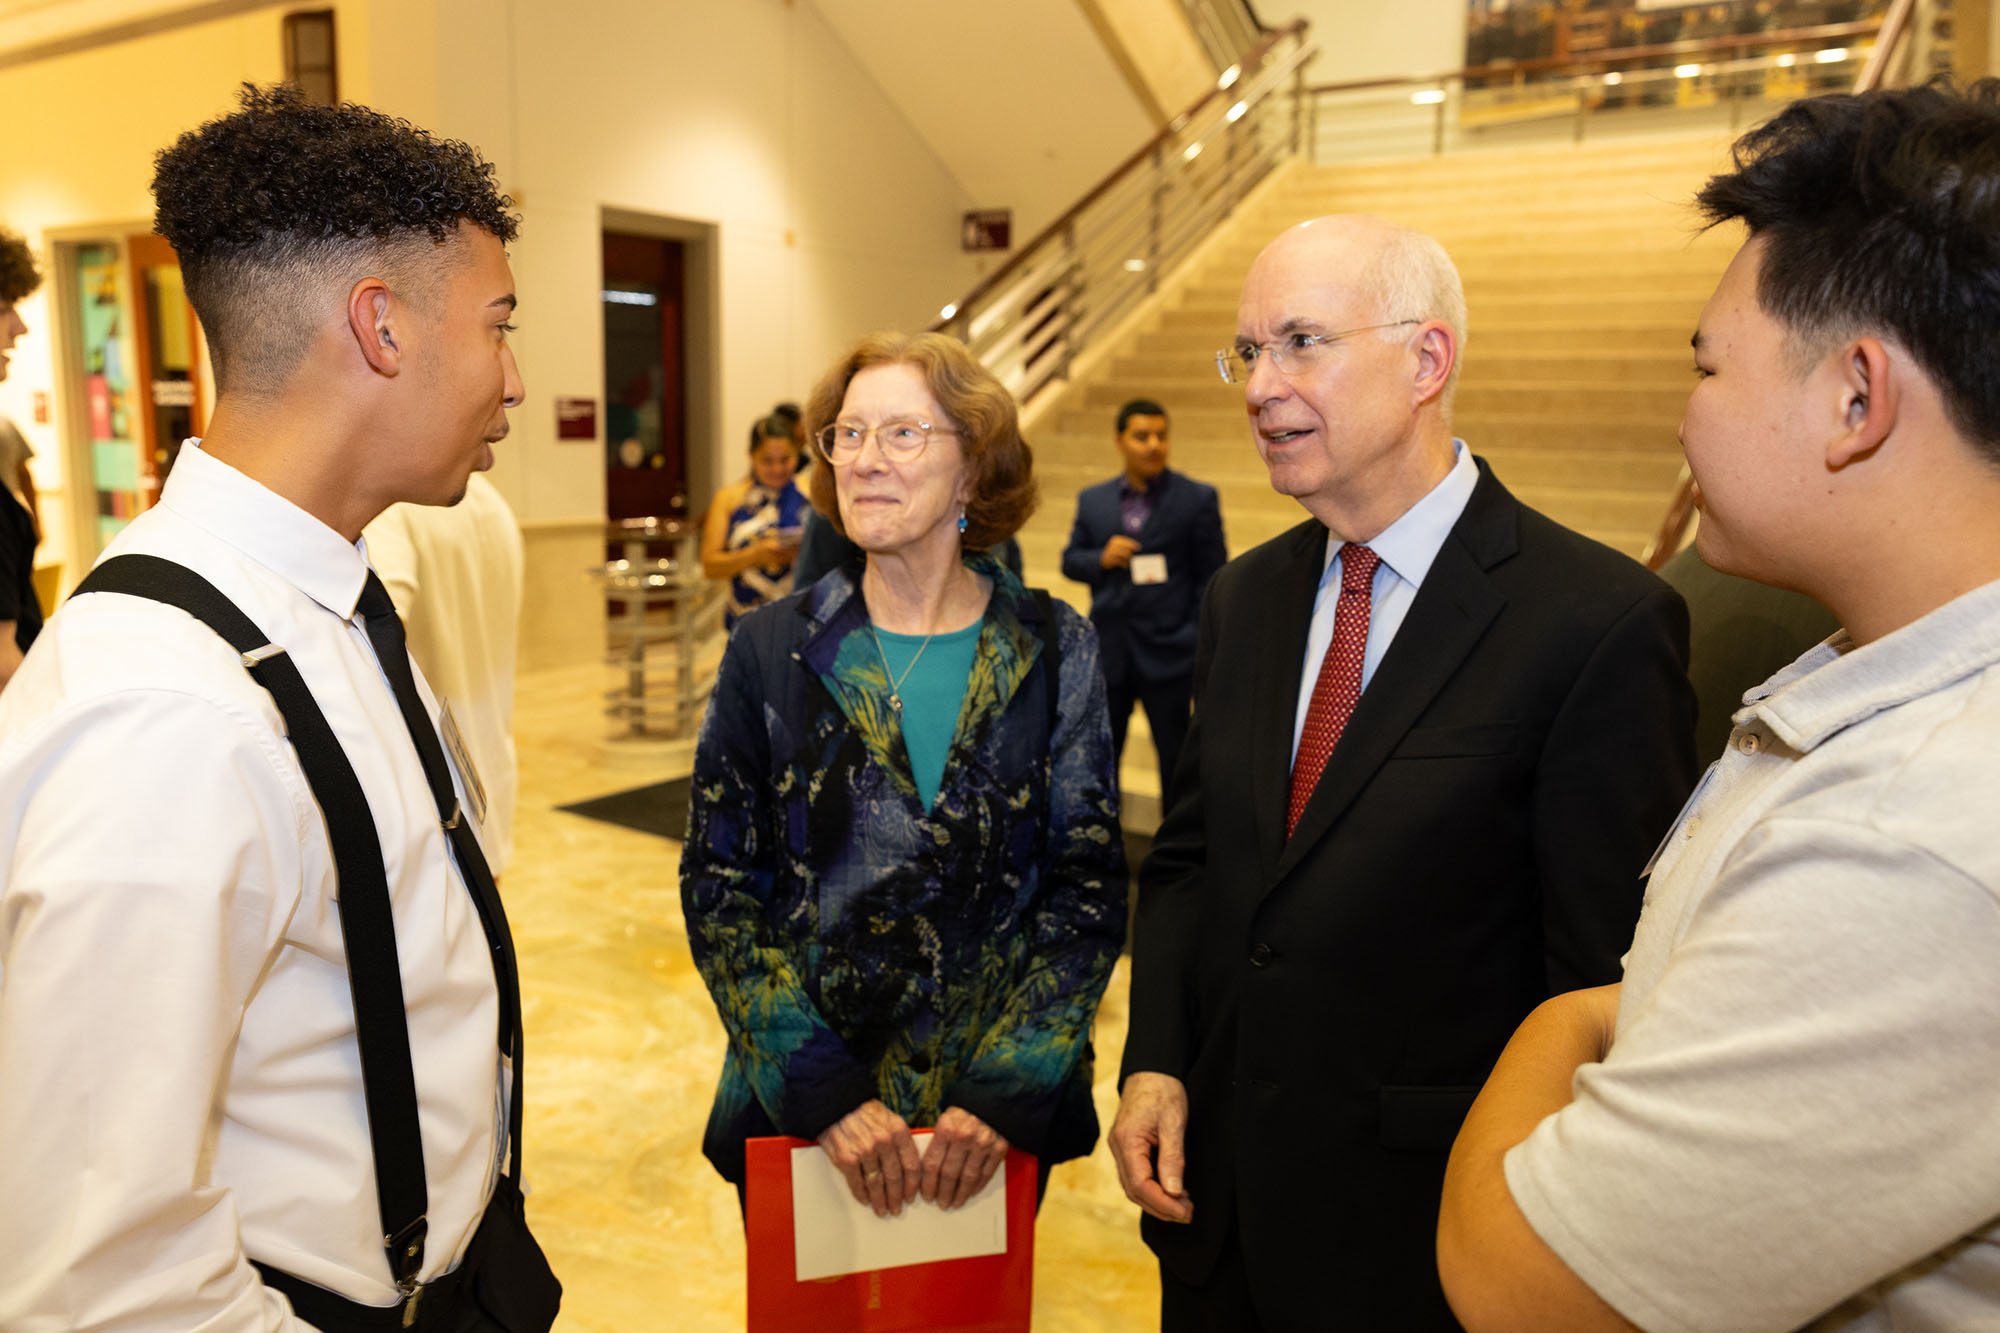 Photo: At last Thursday’s welcome reception, Kenneth Freeman (right), an older white man with white hair and wearing glasses, a light blue, sleeved collared shirt, red tie, and black jacket and pants, chats with two smiling students wearing business casual wear (left).